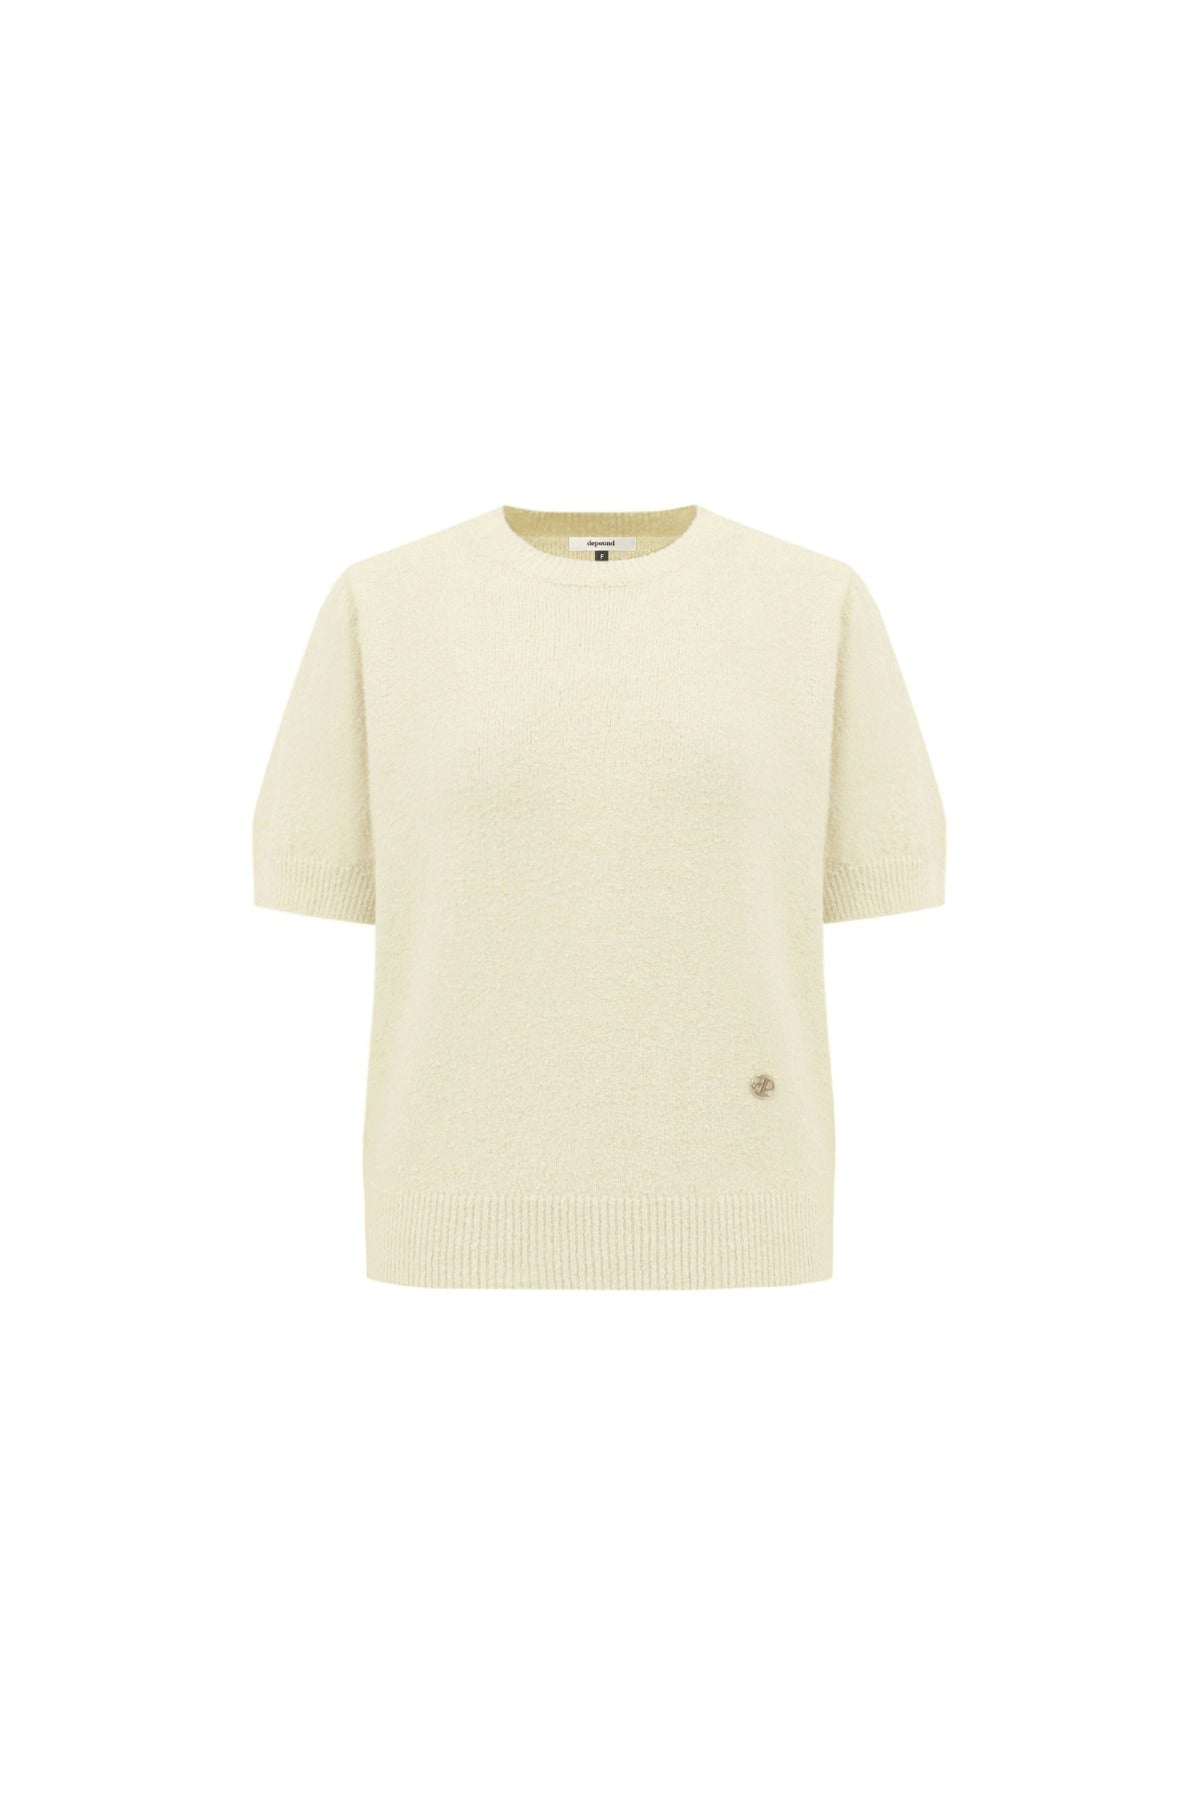 Half Sleeve Boucle Knit In Butter